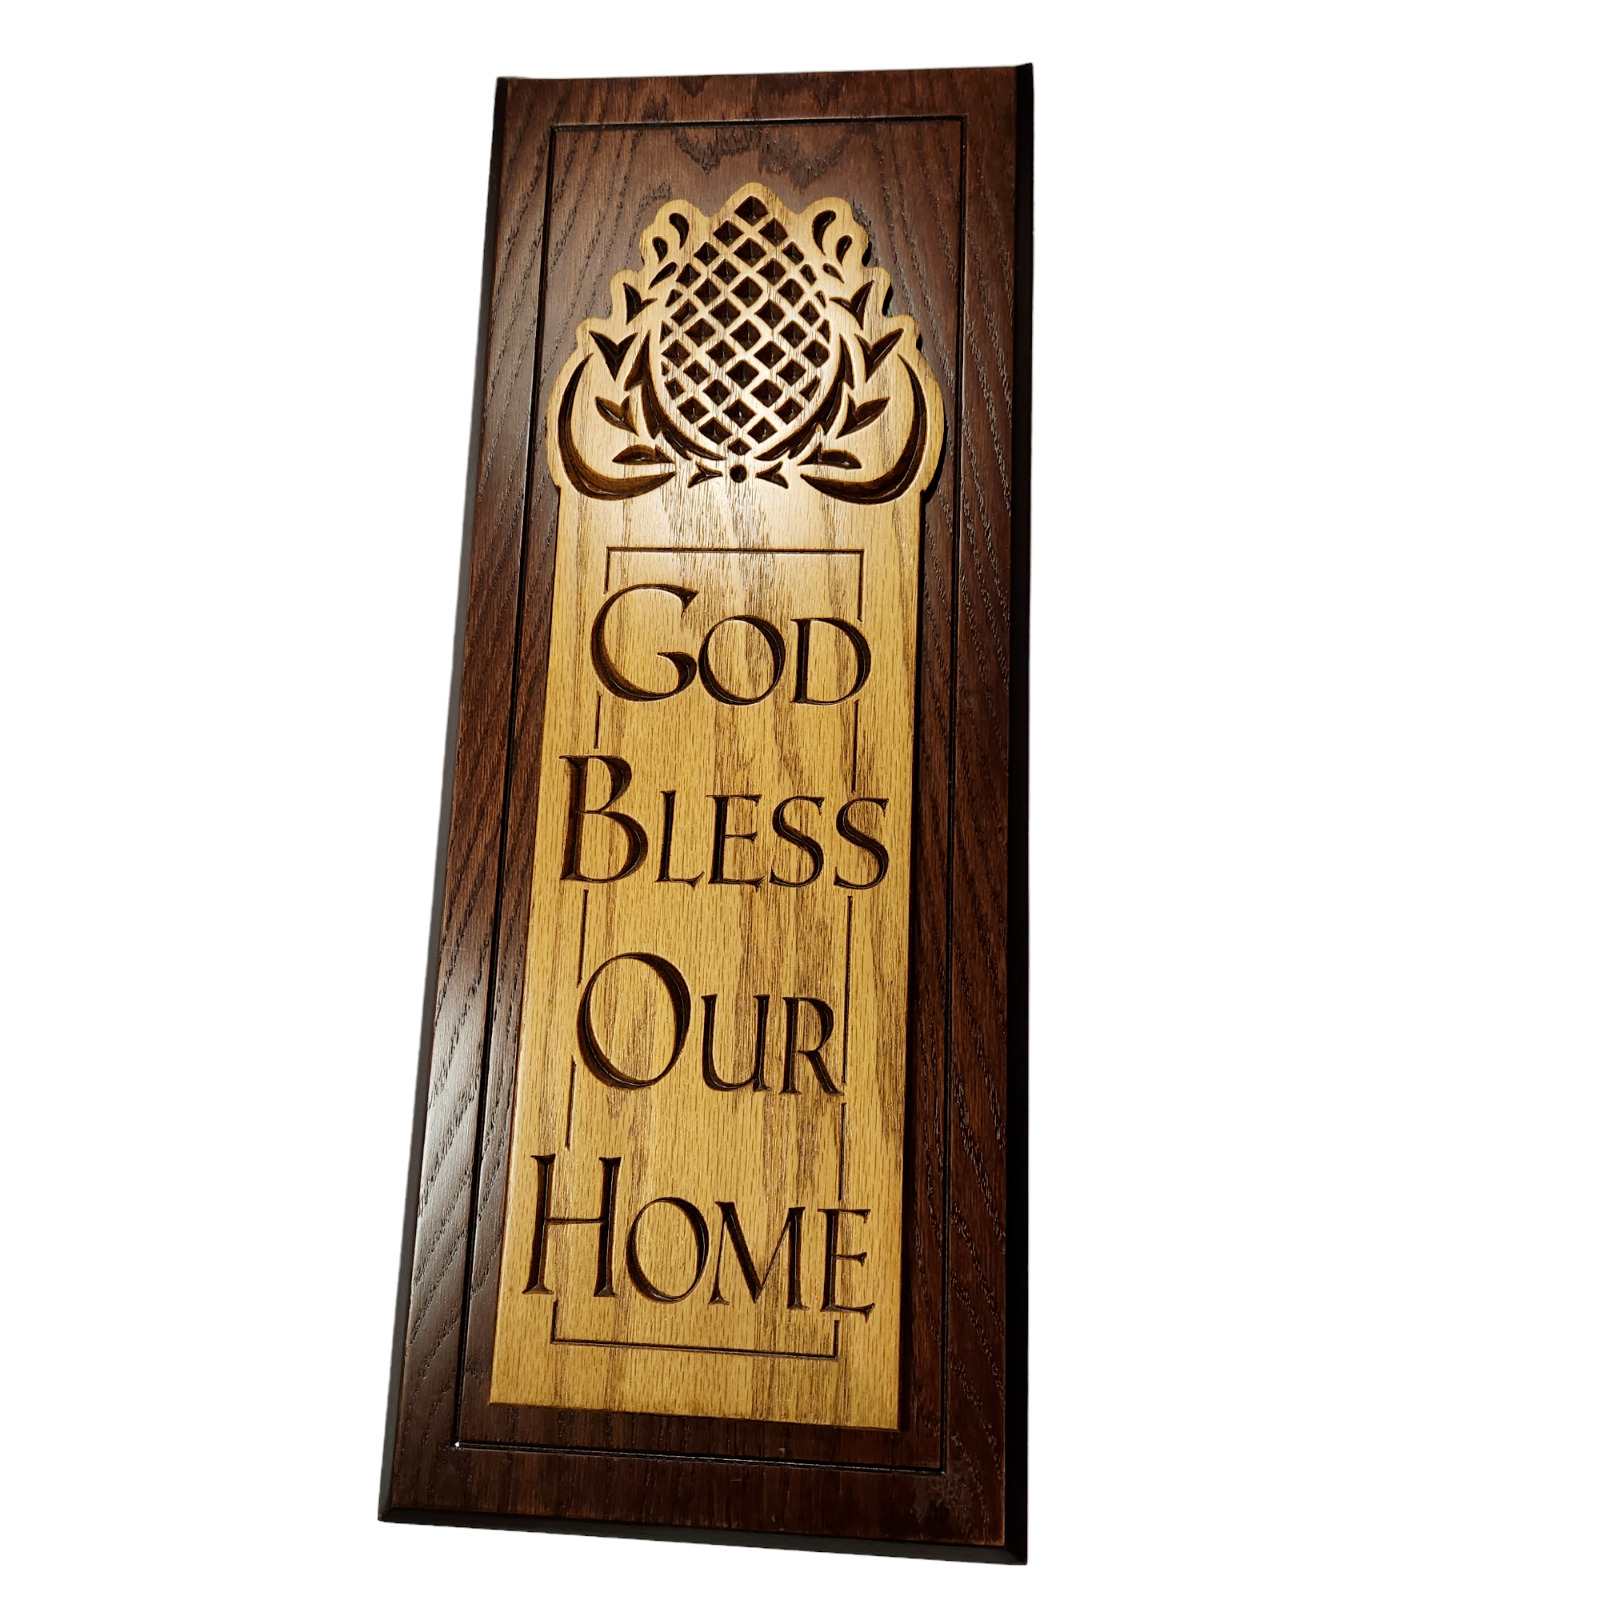 P Graham Dunn 2008 God Bless Our Home Wooden Hanging Plaque 23 Inch